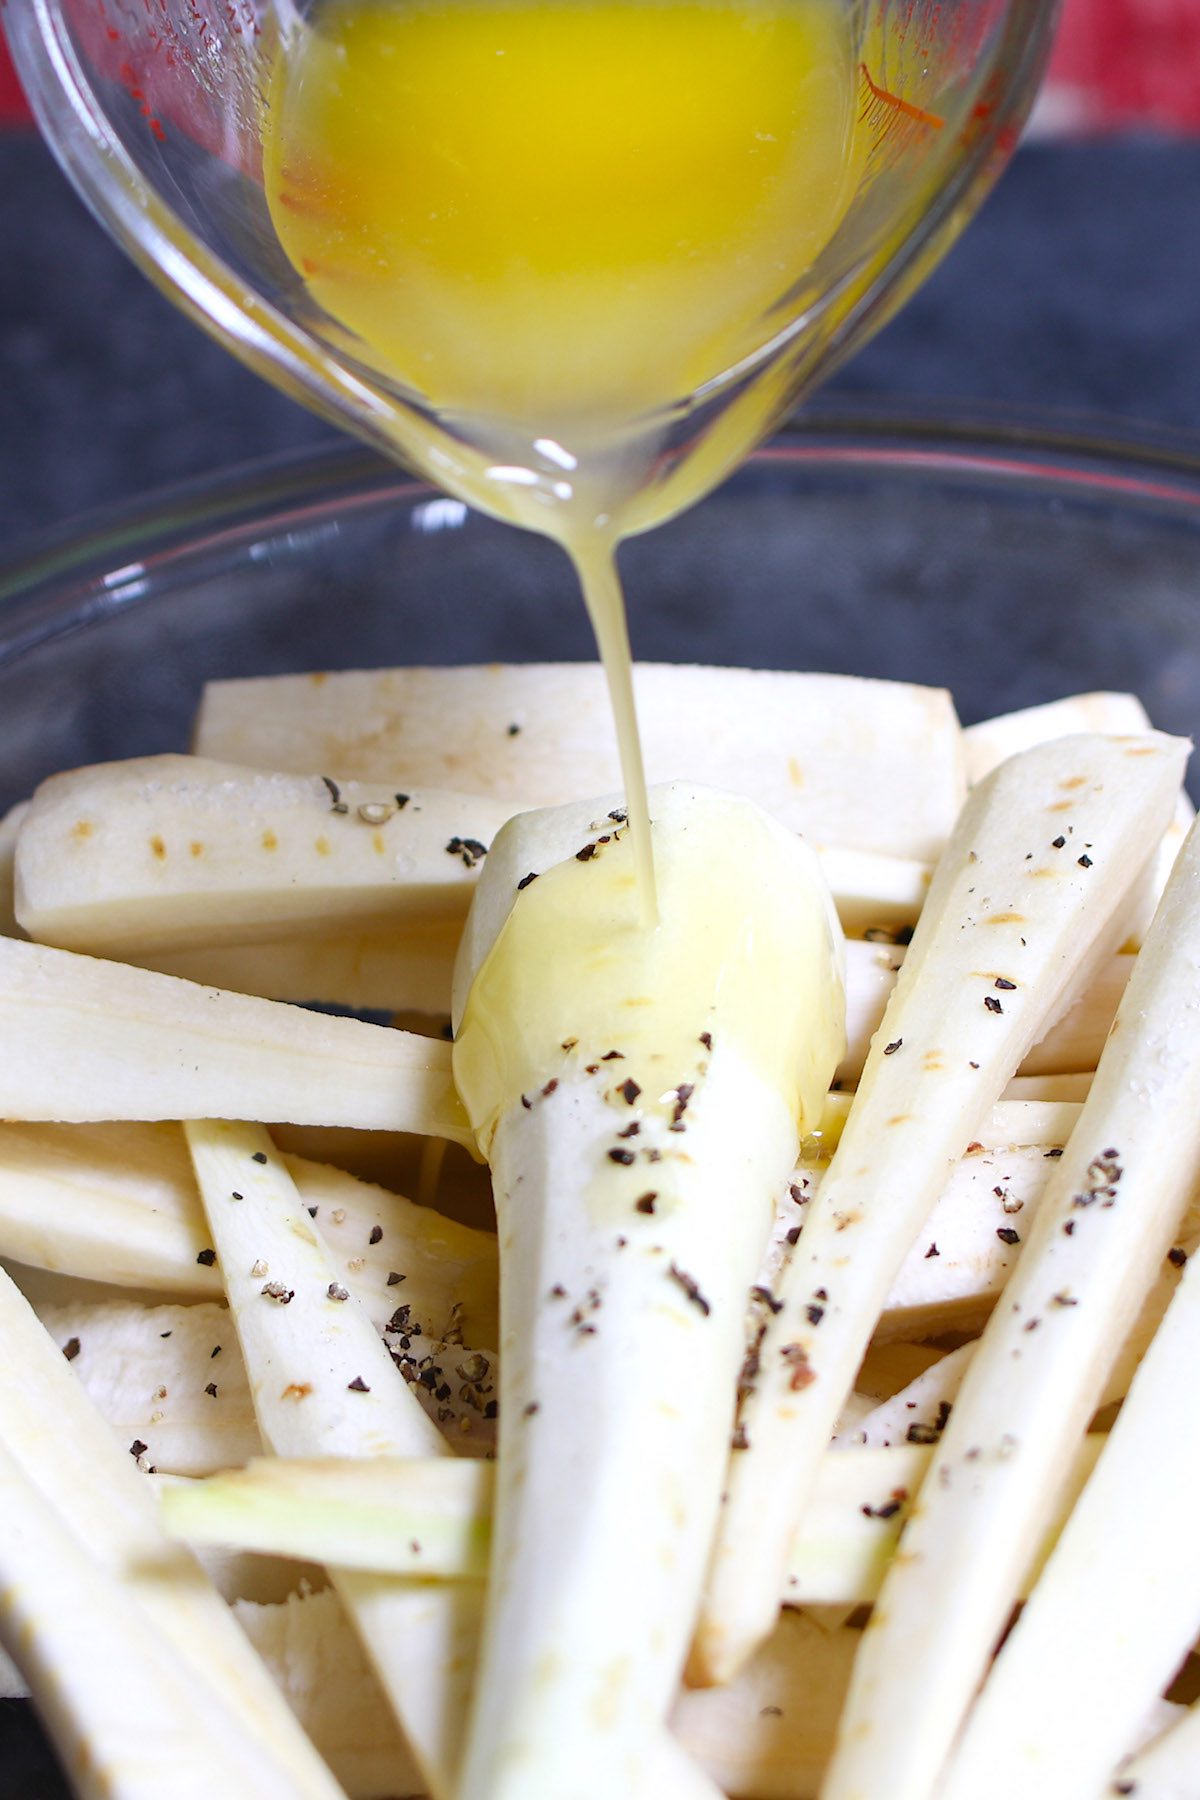 Season parsnips with salt, pepper and melted butter in a clear mixing bowl